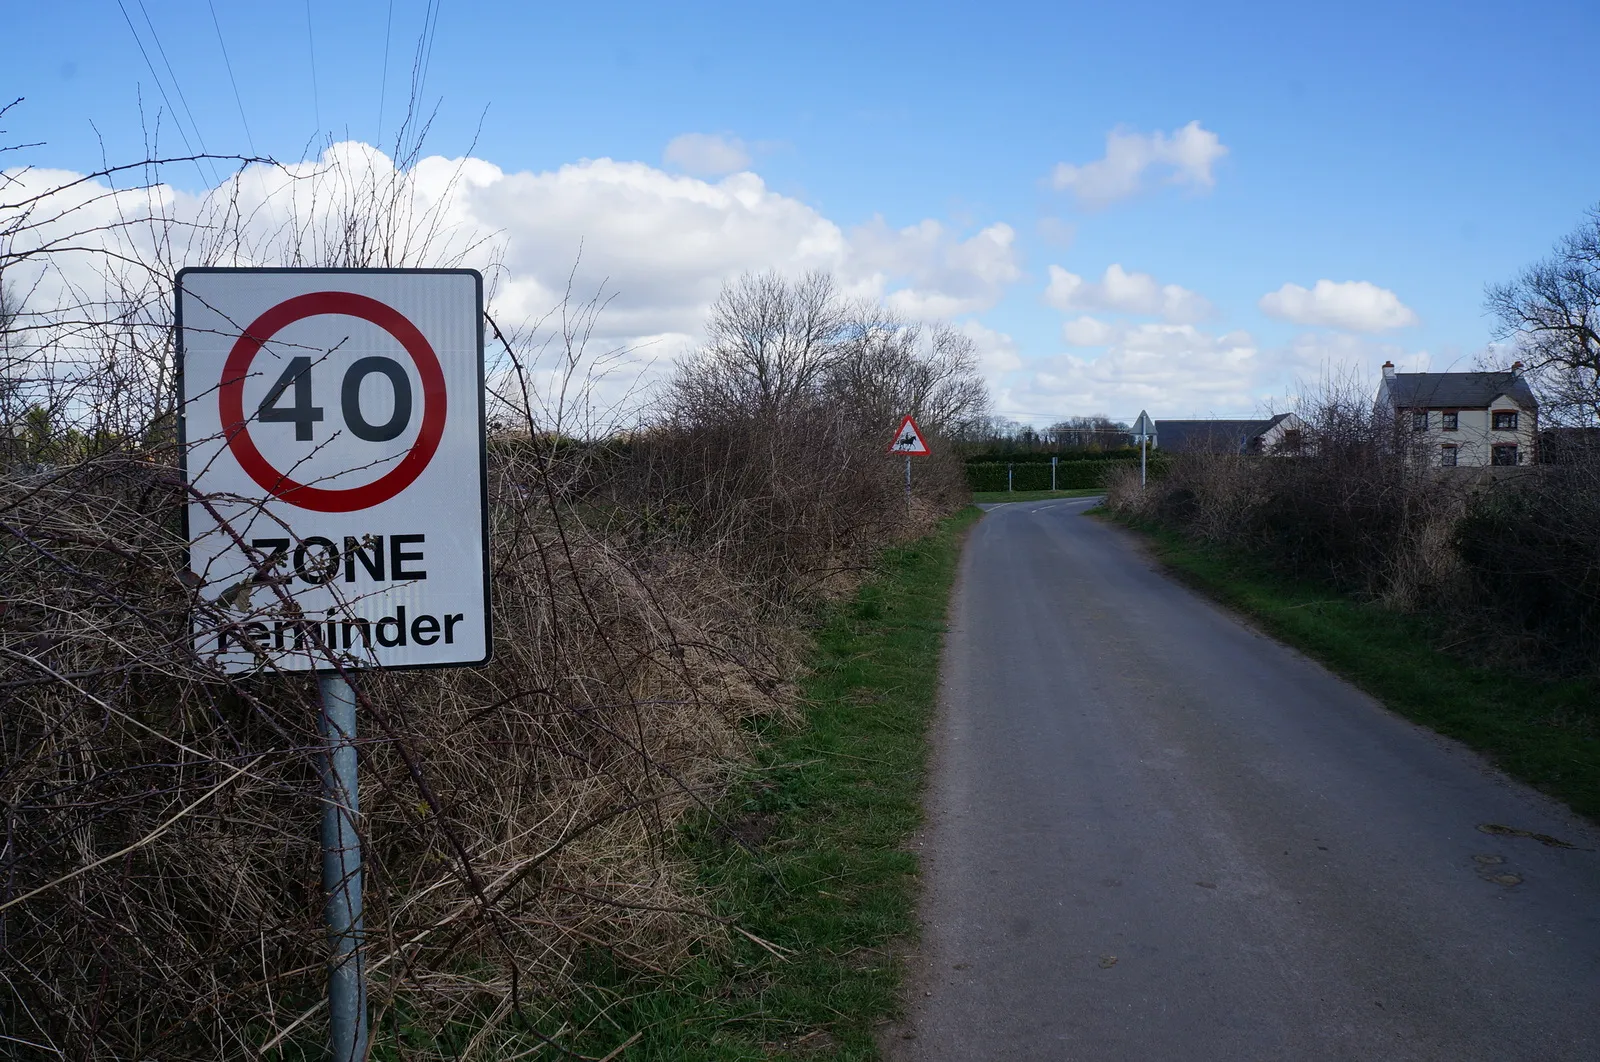 Photo showing: 40mh zone reminder sign on Park Lane, Woodmansey, East Riding of Yorkshire, England.